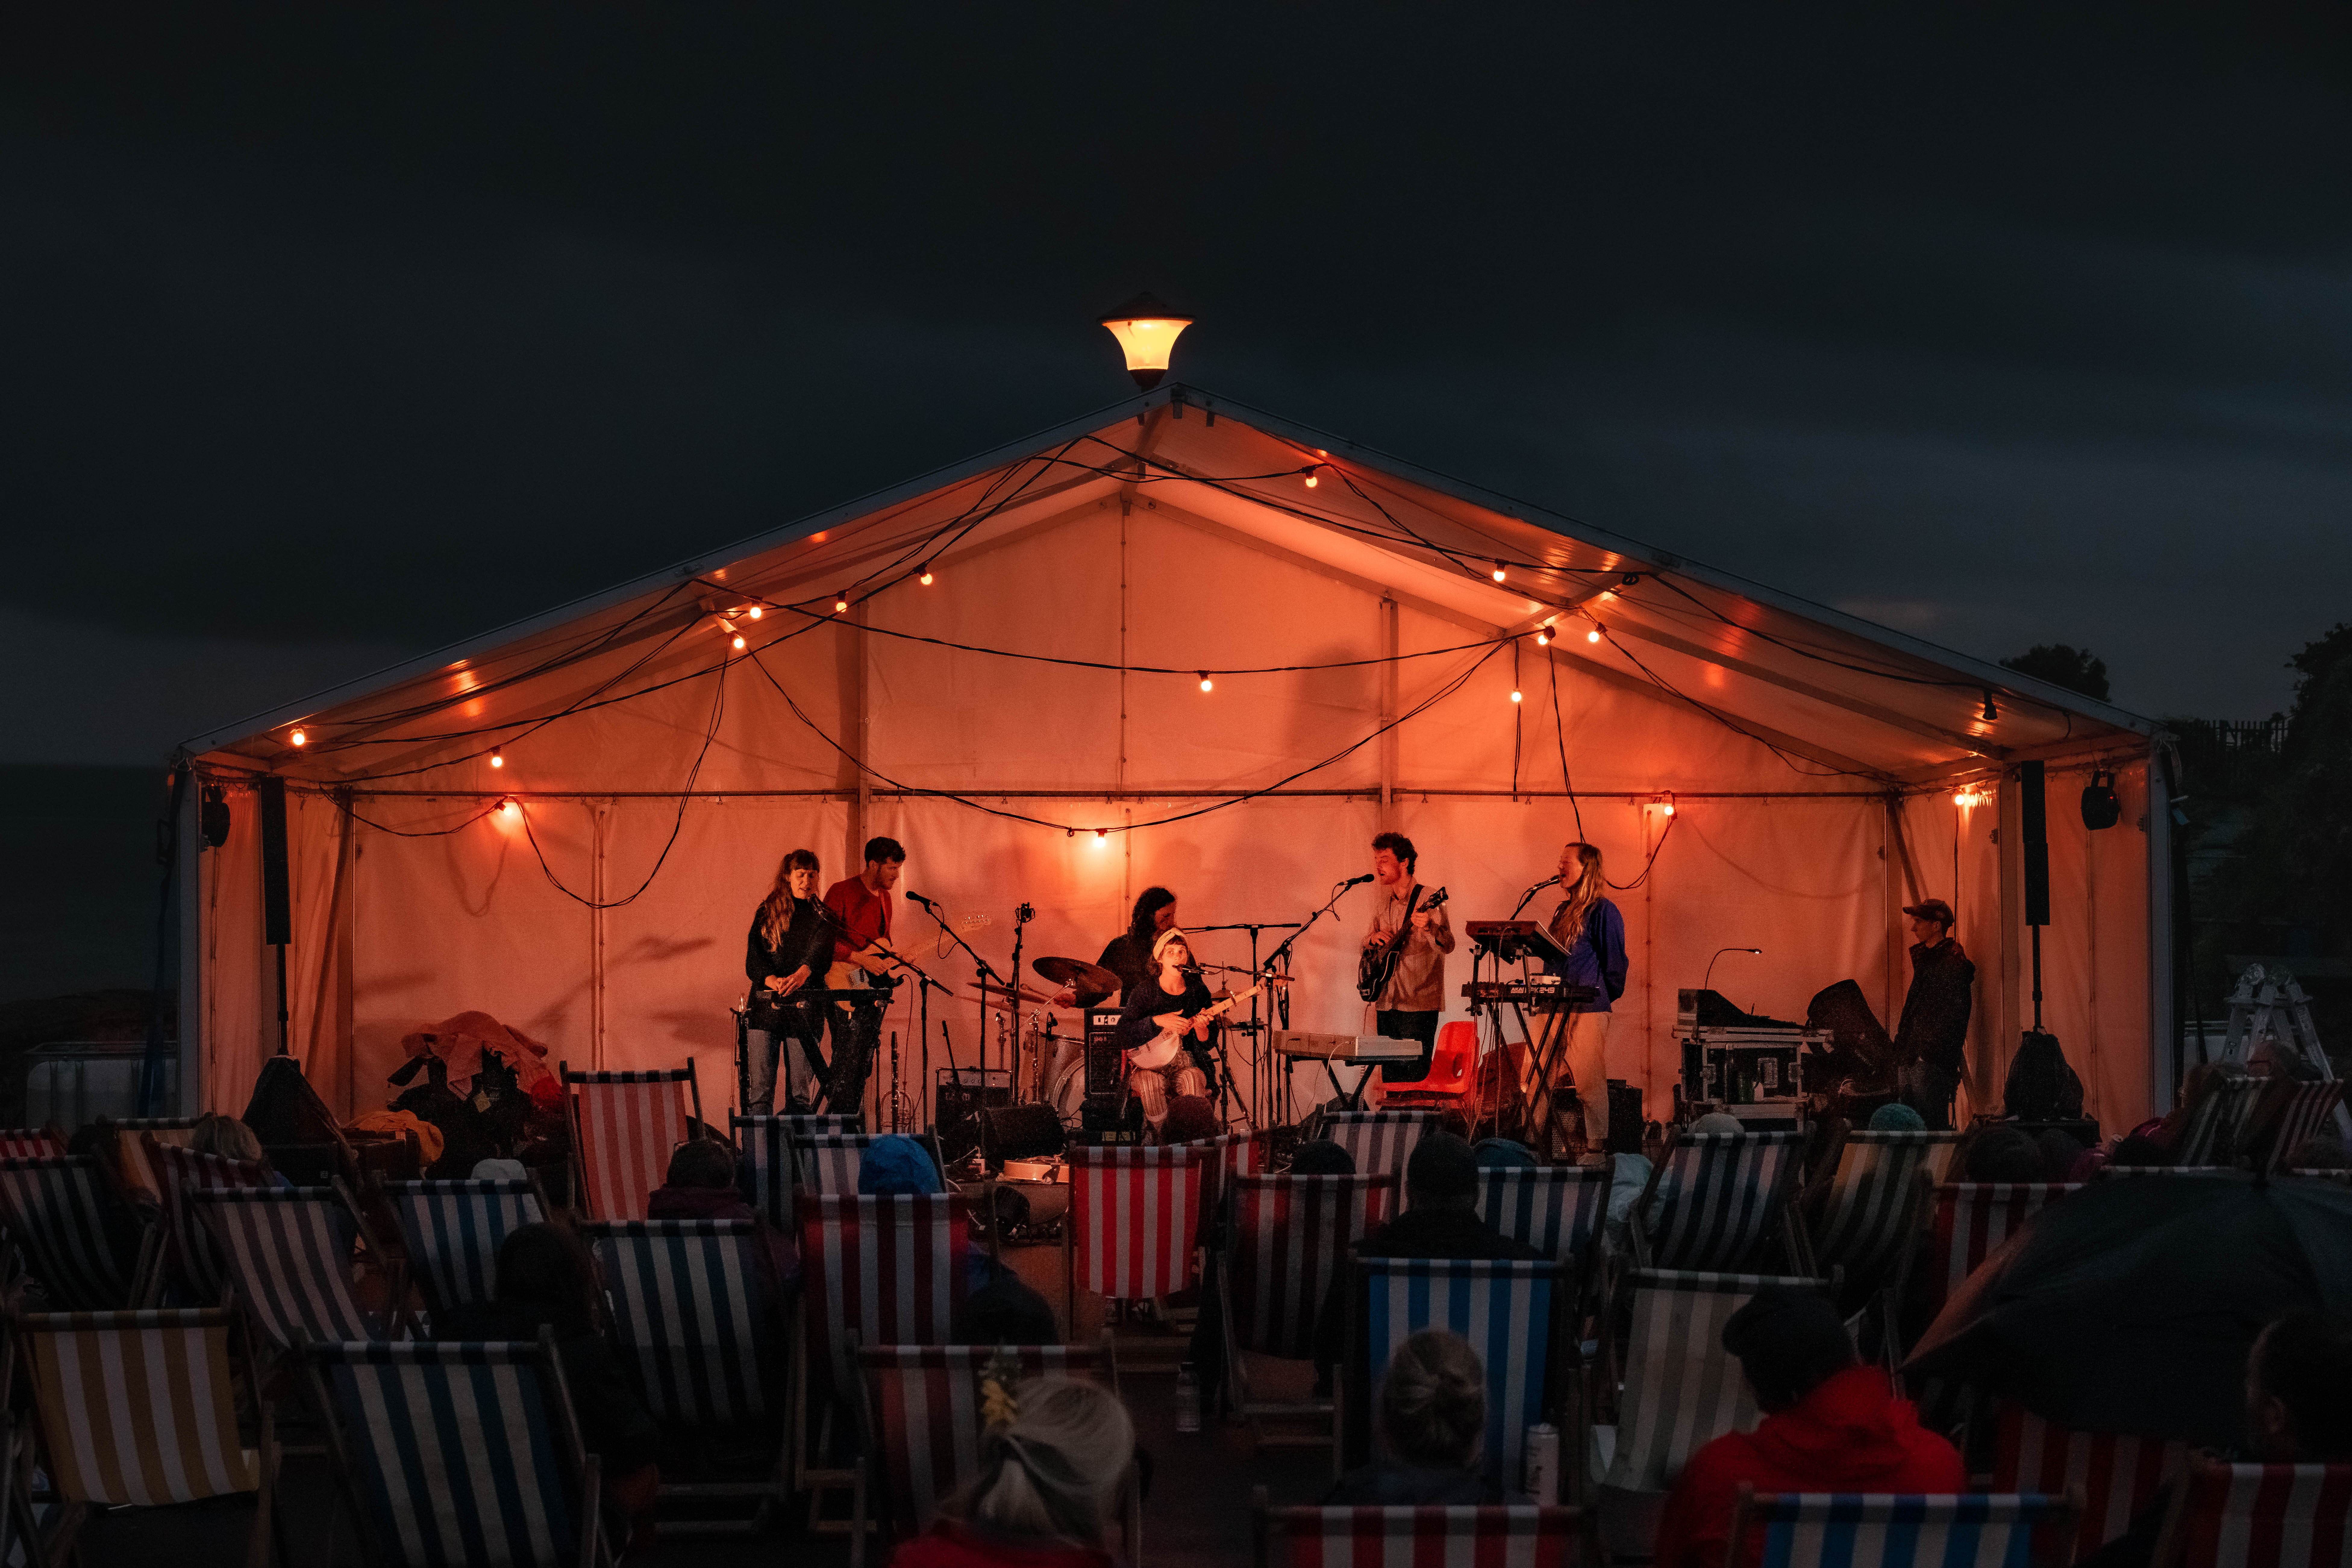 Musicians are performing under a tent at night, lit up with orange lights. They are performing in front of an audience sat on deckchairs 